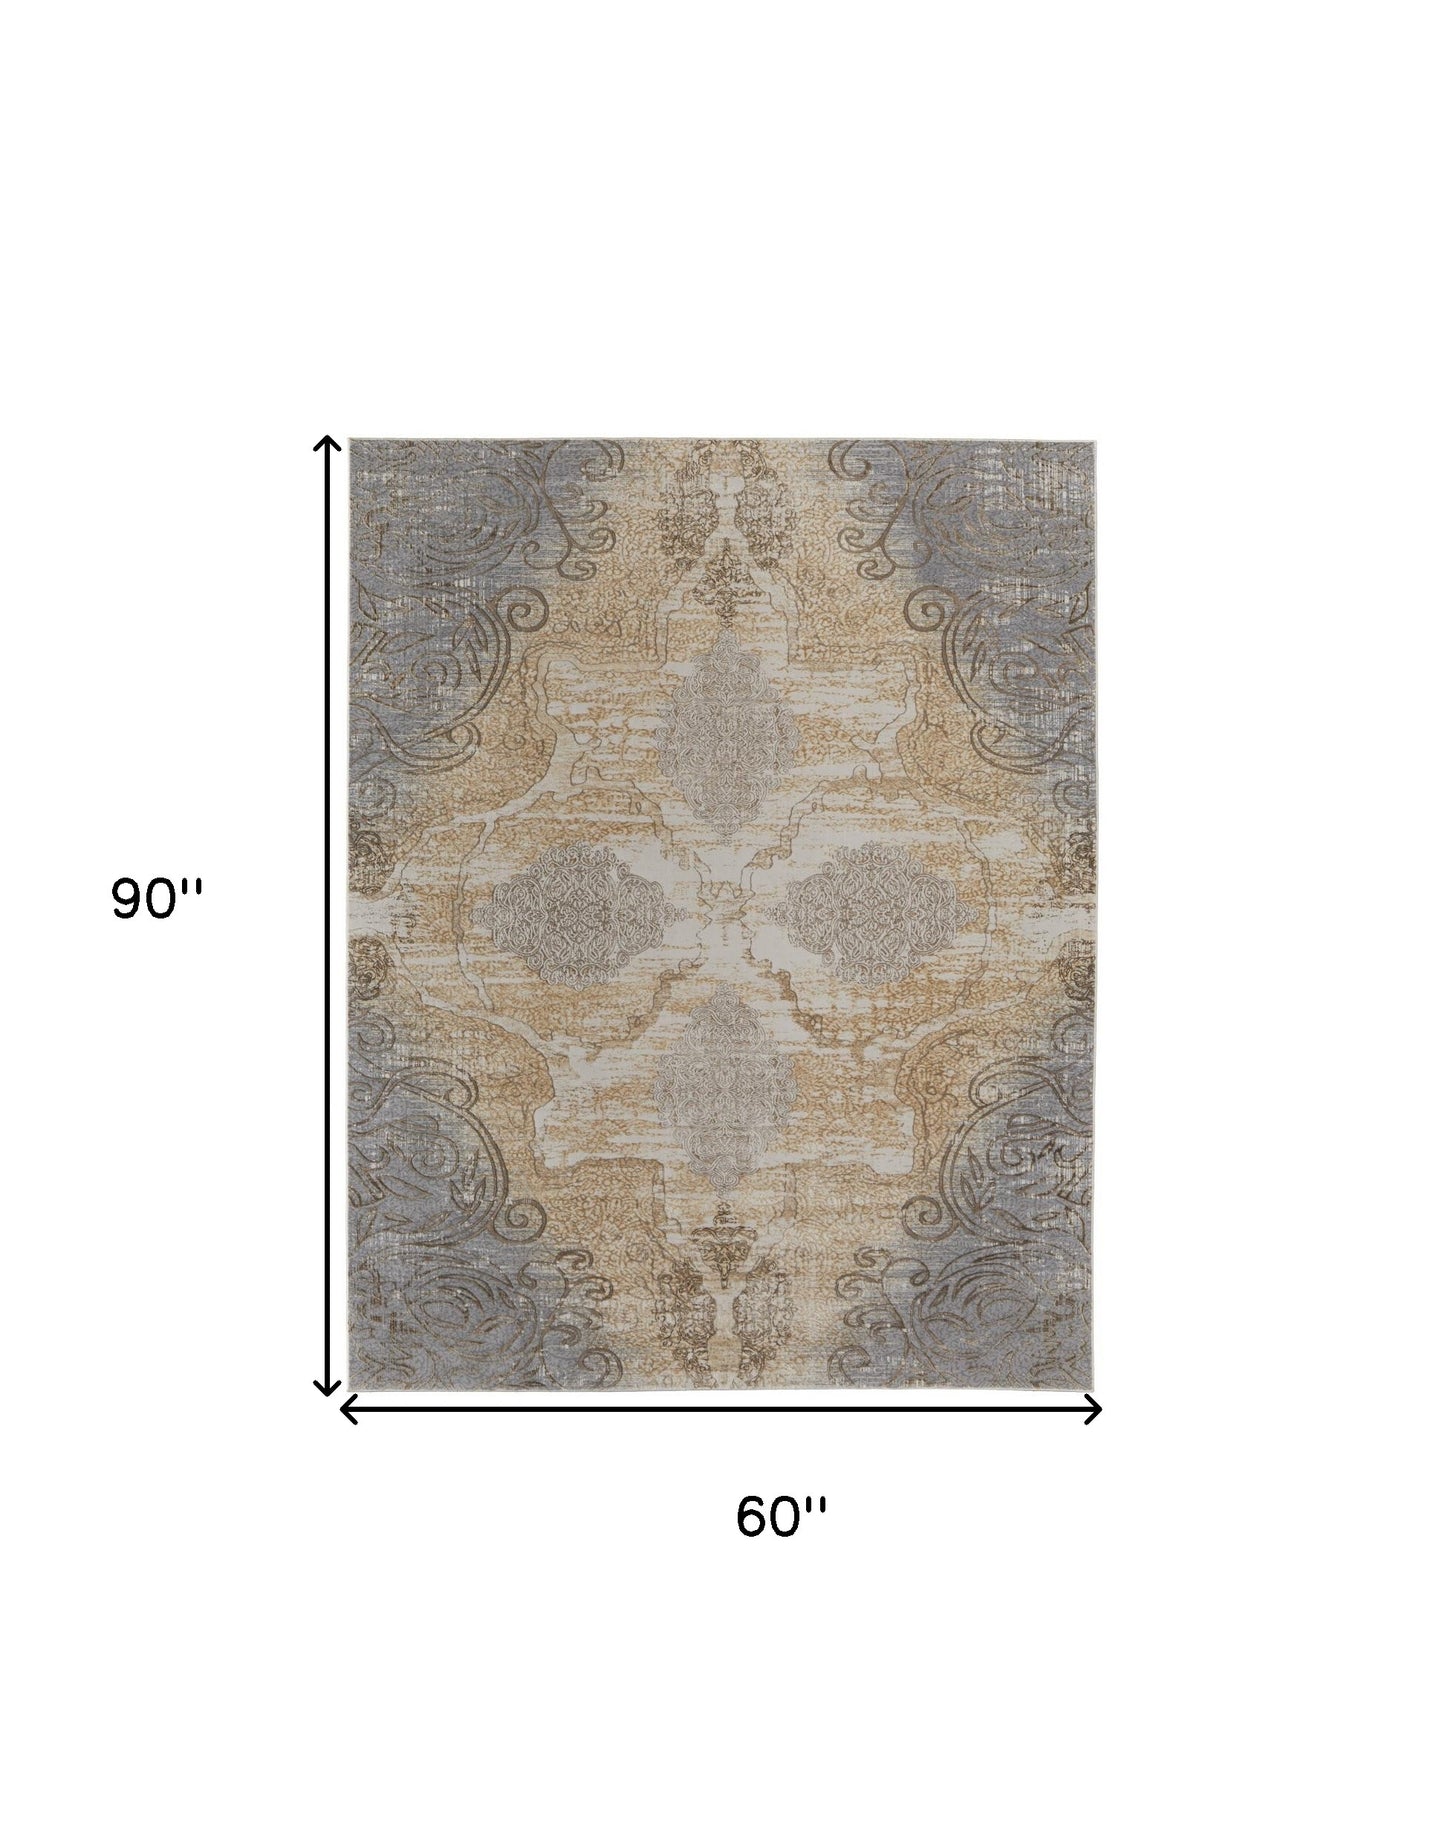 4' X 6' Silver Tan And Gray Floral Power Loom Area Rug